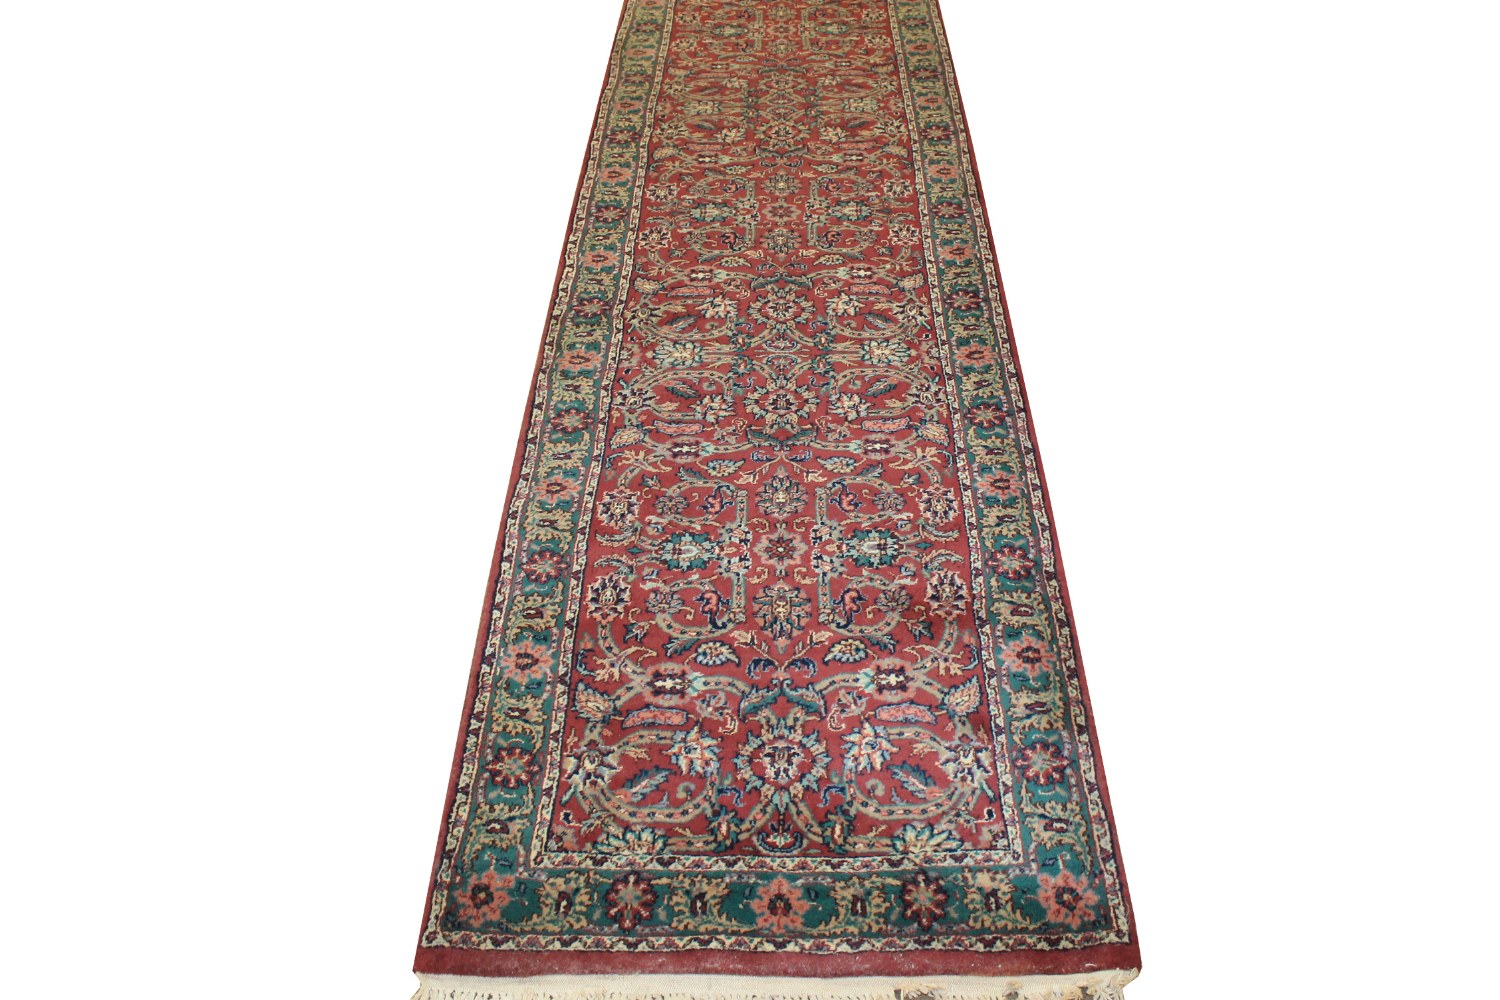 10 Runner Jaipur Hand Knotted Wool Area Rug - MR021638